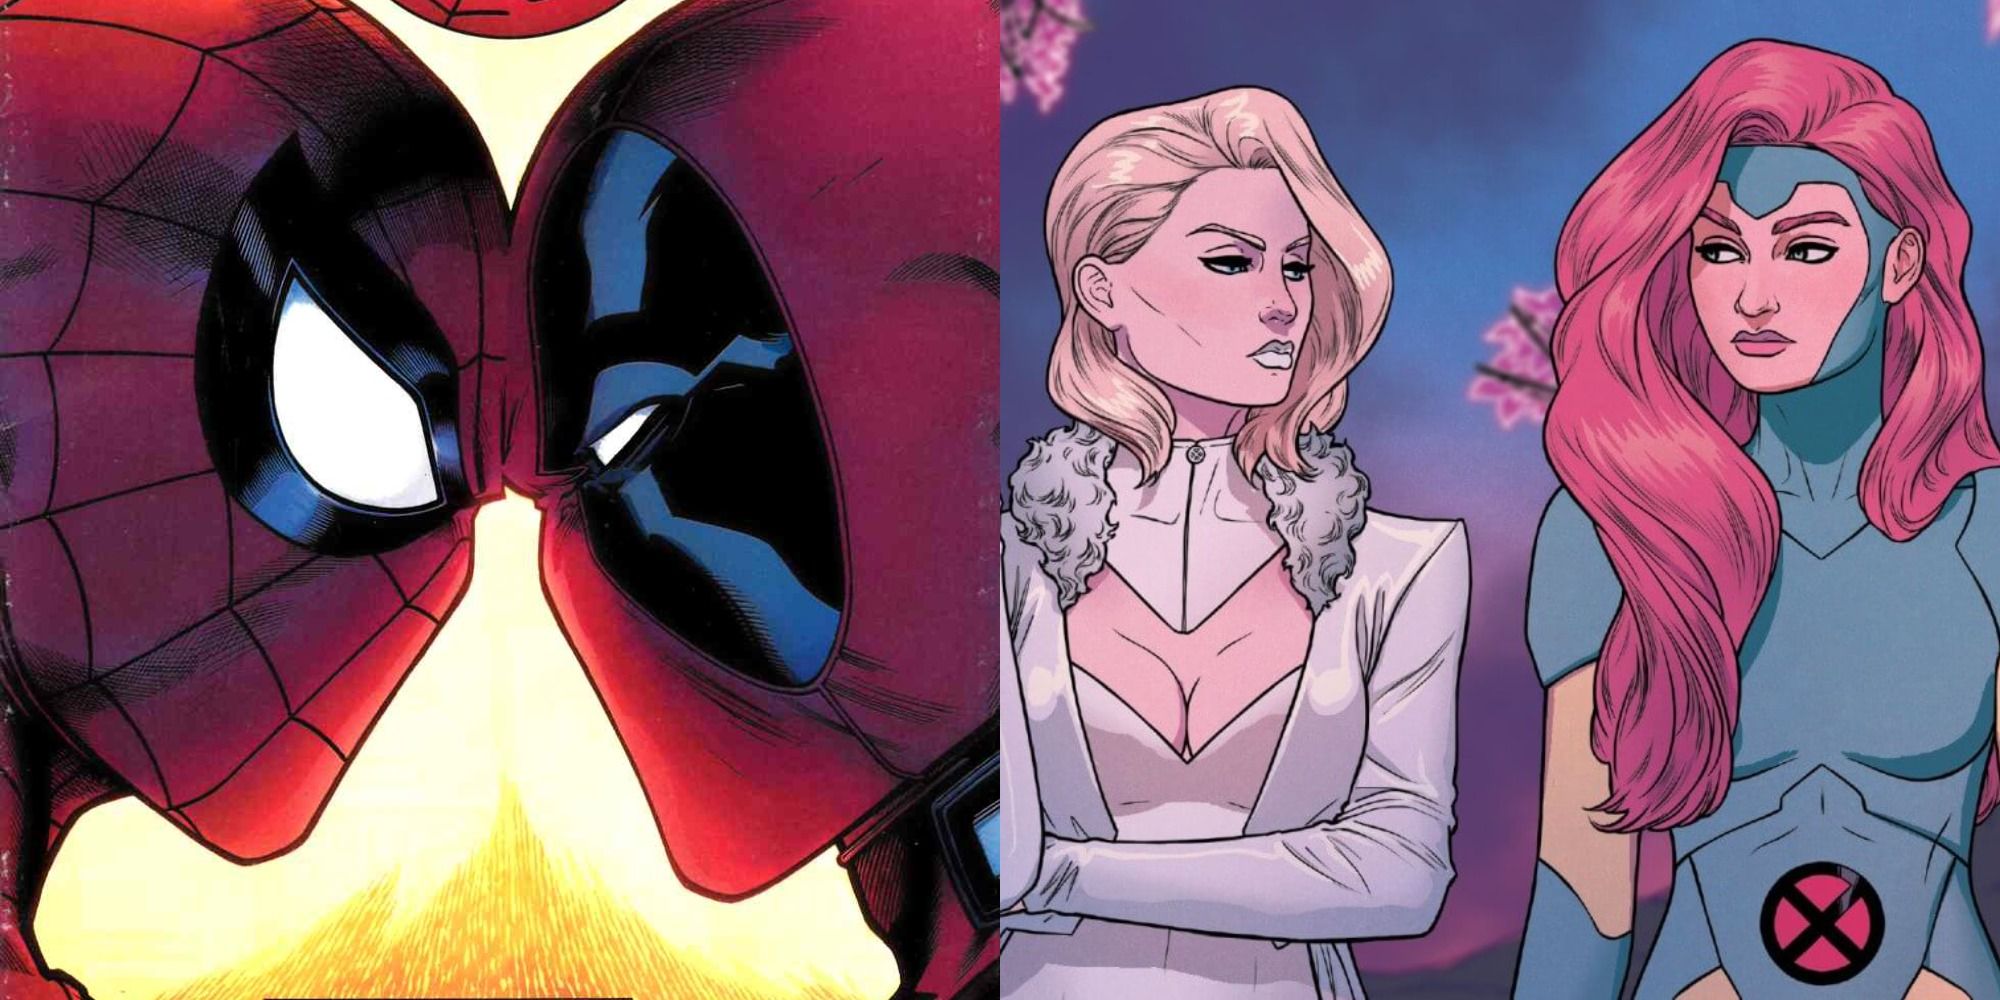 Split image showing Spider-Man and Deadpool and Emma Frost and Jean Grey